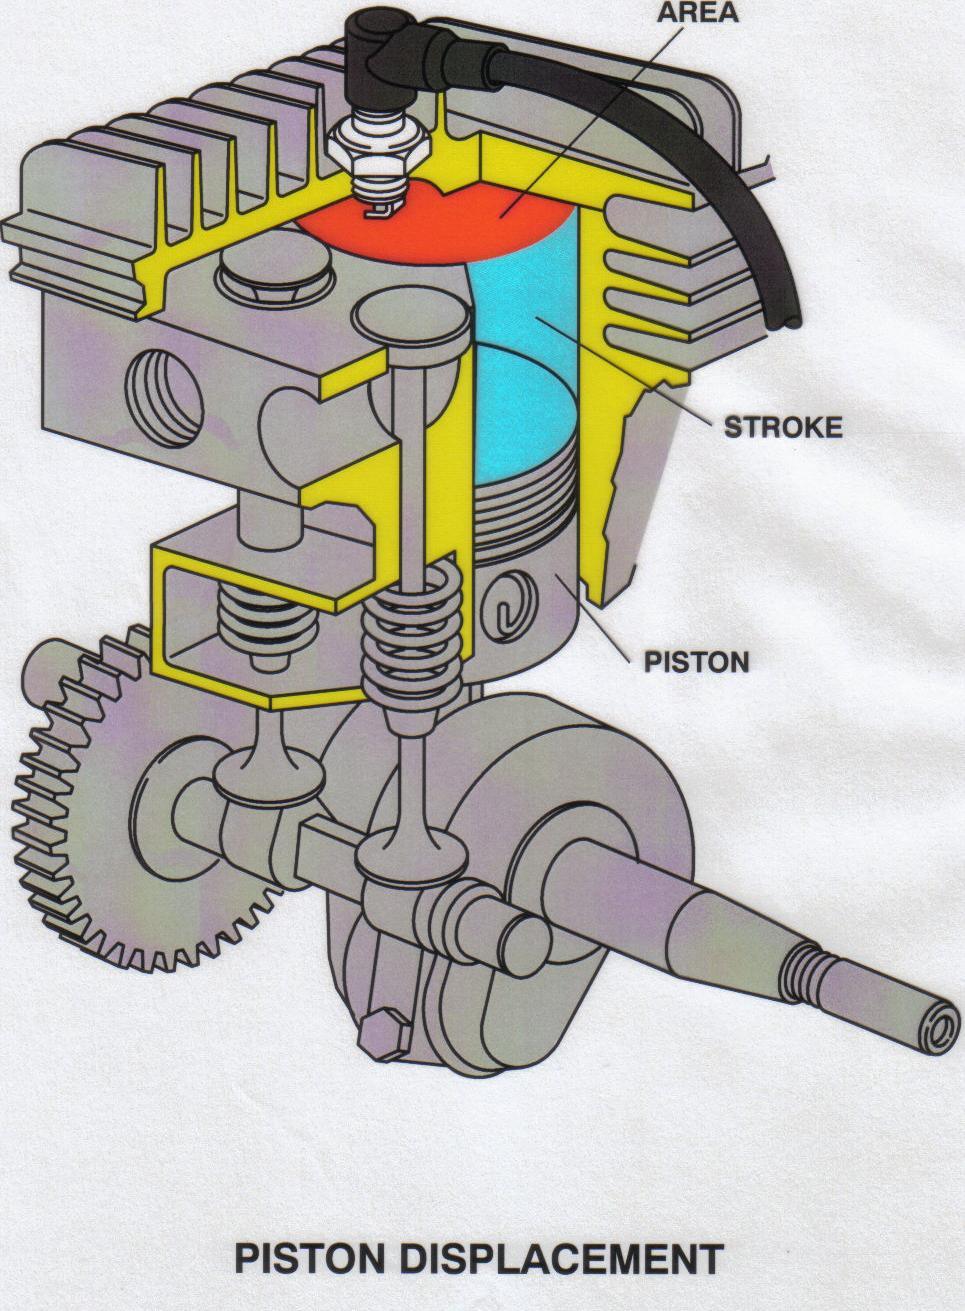 2. The stroke of an engine is a measurement of the the piston travels.